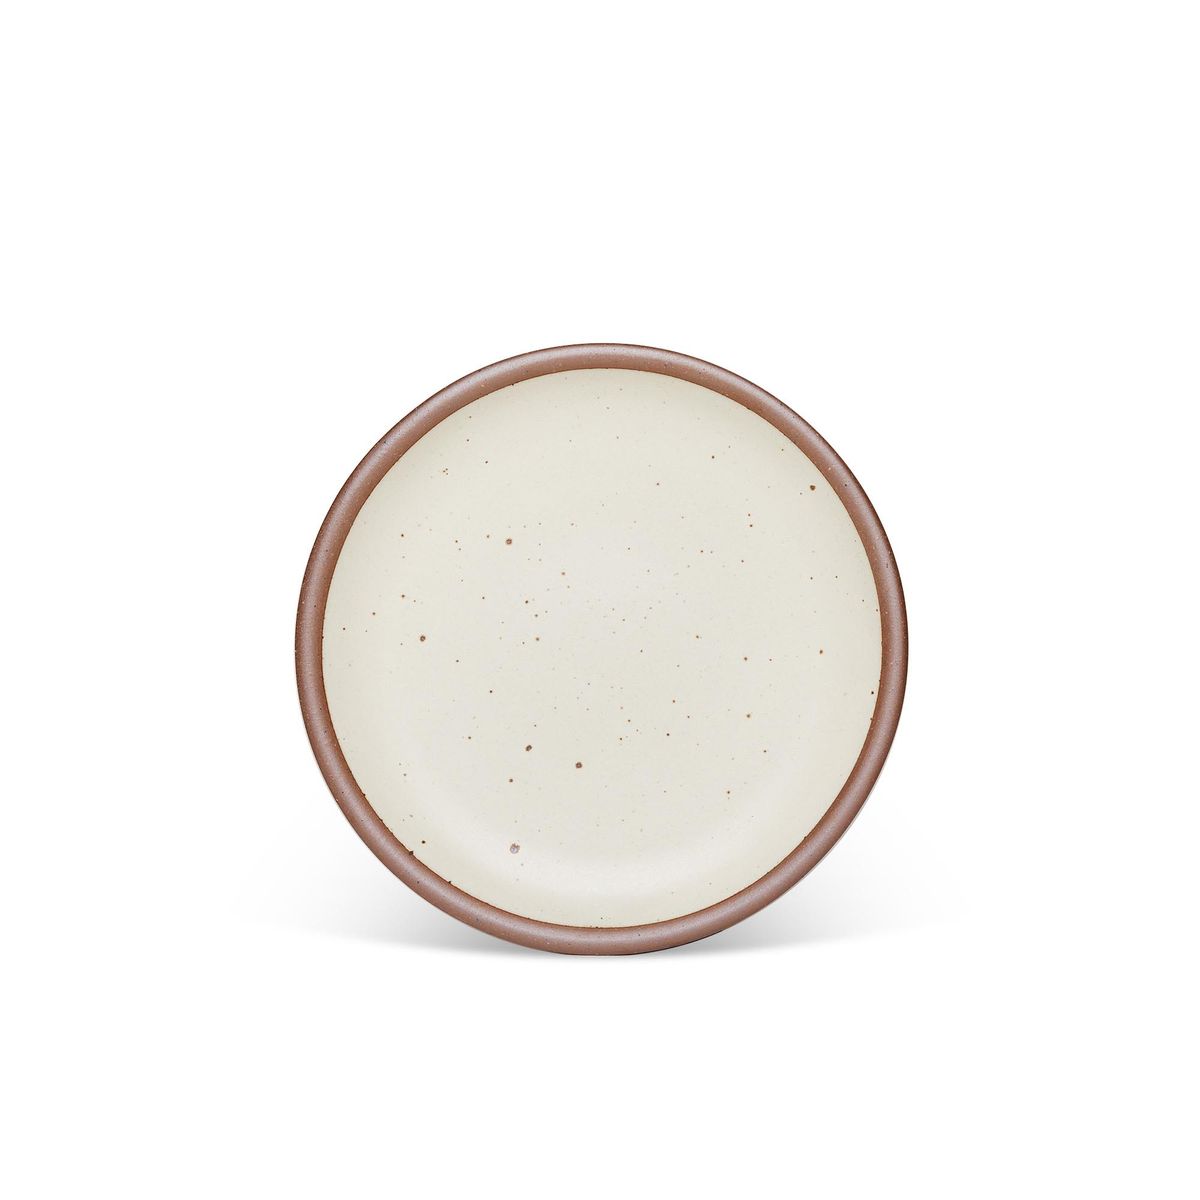 A medium sized ceramic plate in a warm, tan-toned, off-whitecolor featuring iron speckles and an unglazed rim.